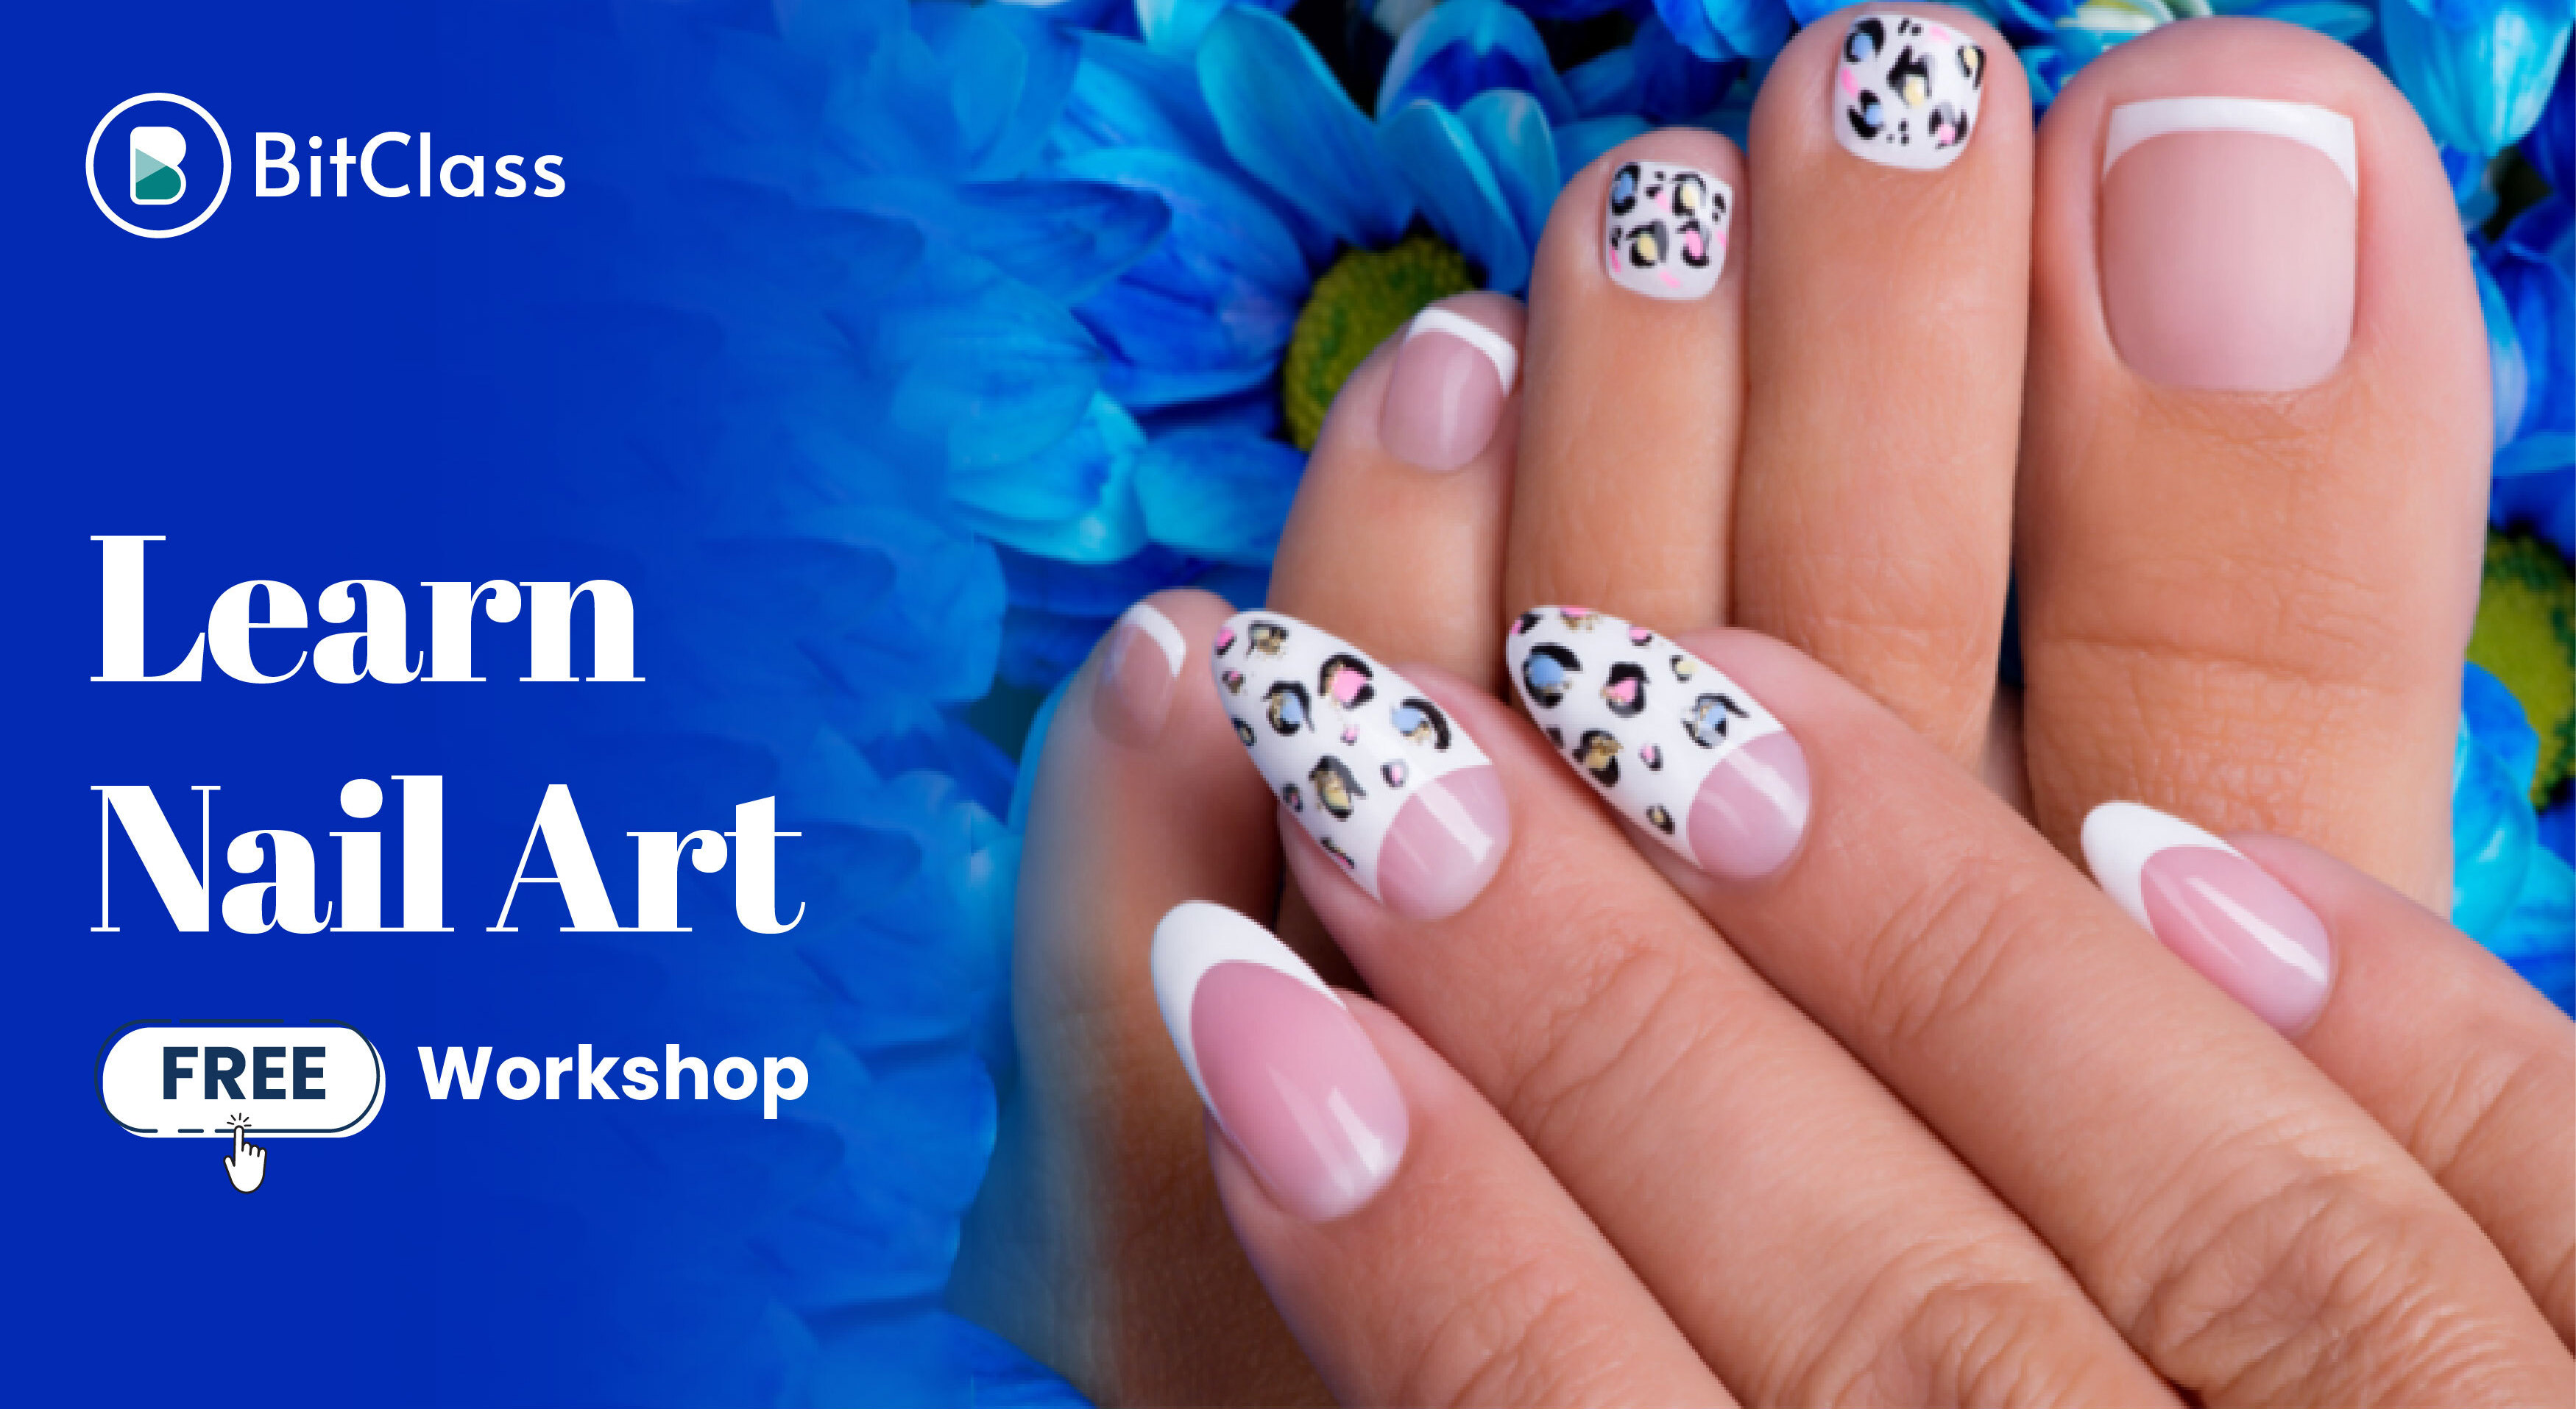 1. Nail Art Academy South Africa
2. Nail Art Courses in Johannesburg
3. Nail Art Training in Cape Town
4. Nail Art Classes in Durban
5. Nail Art Workshops in Pretoria
6. Nail Art Certification in Port Elizabeth
7. Advanced Nail Art Techniques in Bloemfontein
8. Professional Nail Art Courses in East London
9. Online Nail Art Classes in Pietermaritzburg
10. Nail Art Supplies and Courses in Nelspruit - wide 2